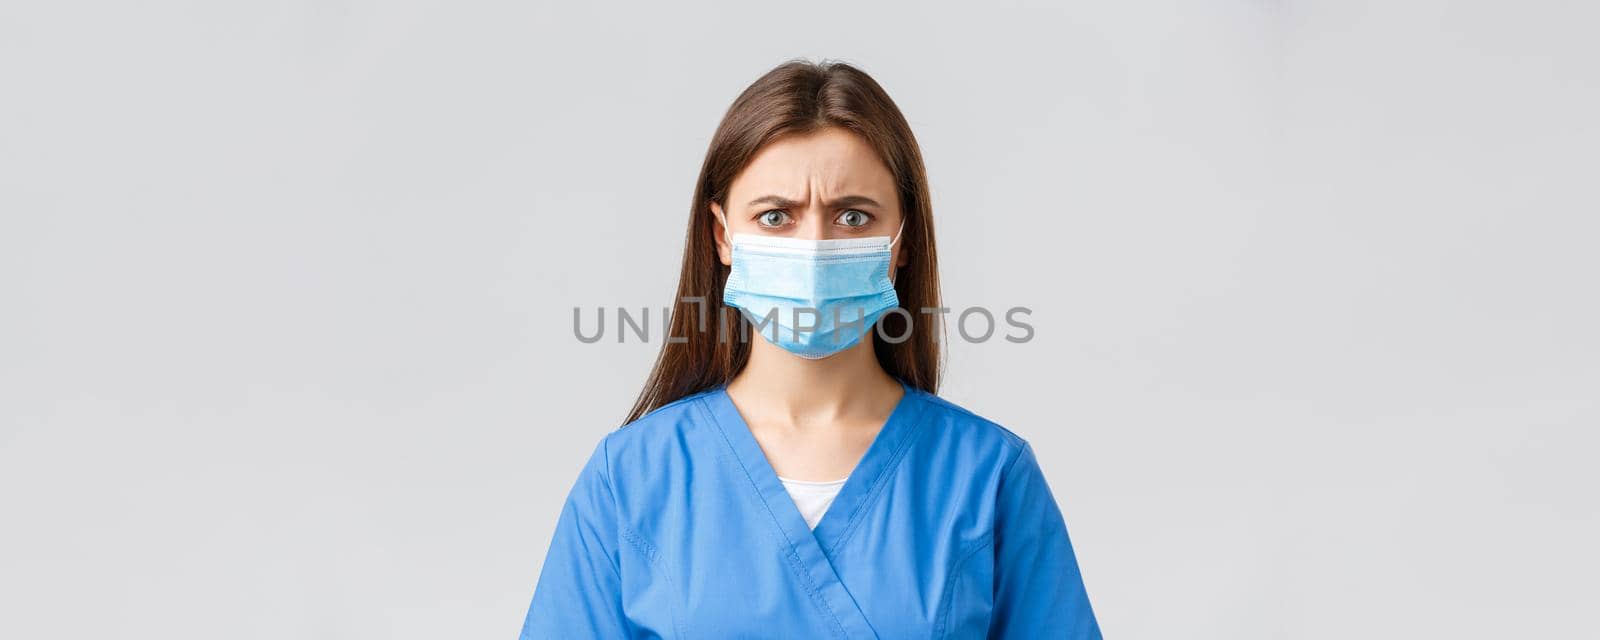 Covid-19, preventing virus, health, healthcare workers and quarantine concept. Angry or frustrated female nurse reacting to bad news. Doctor in blue scrubs and medical mask frowning disappointed.